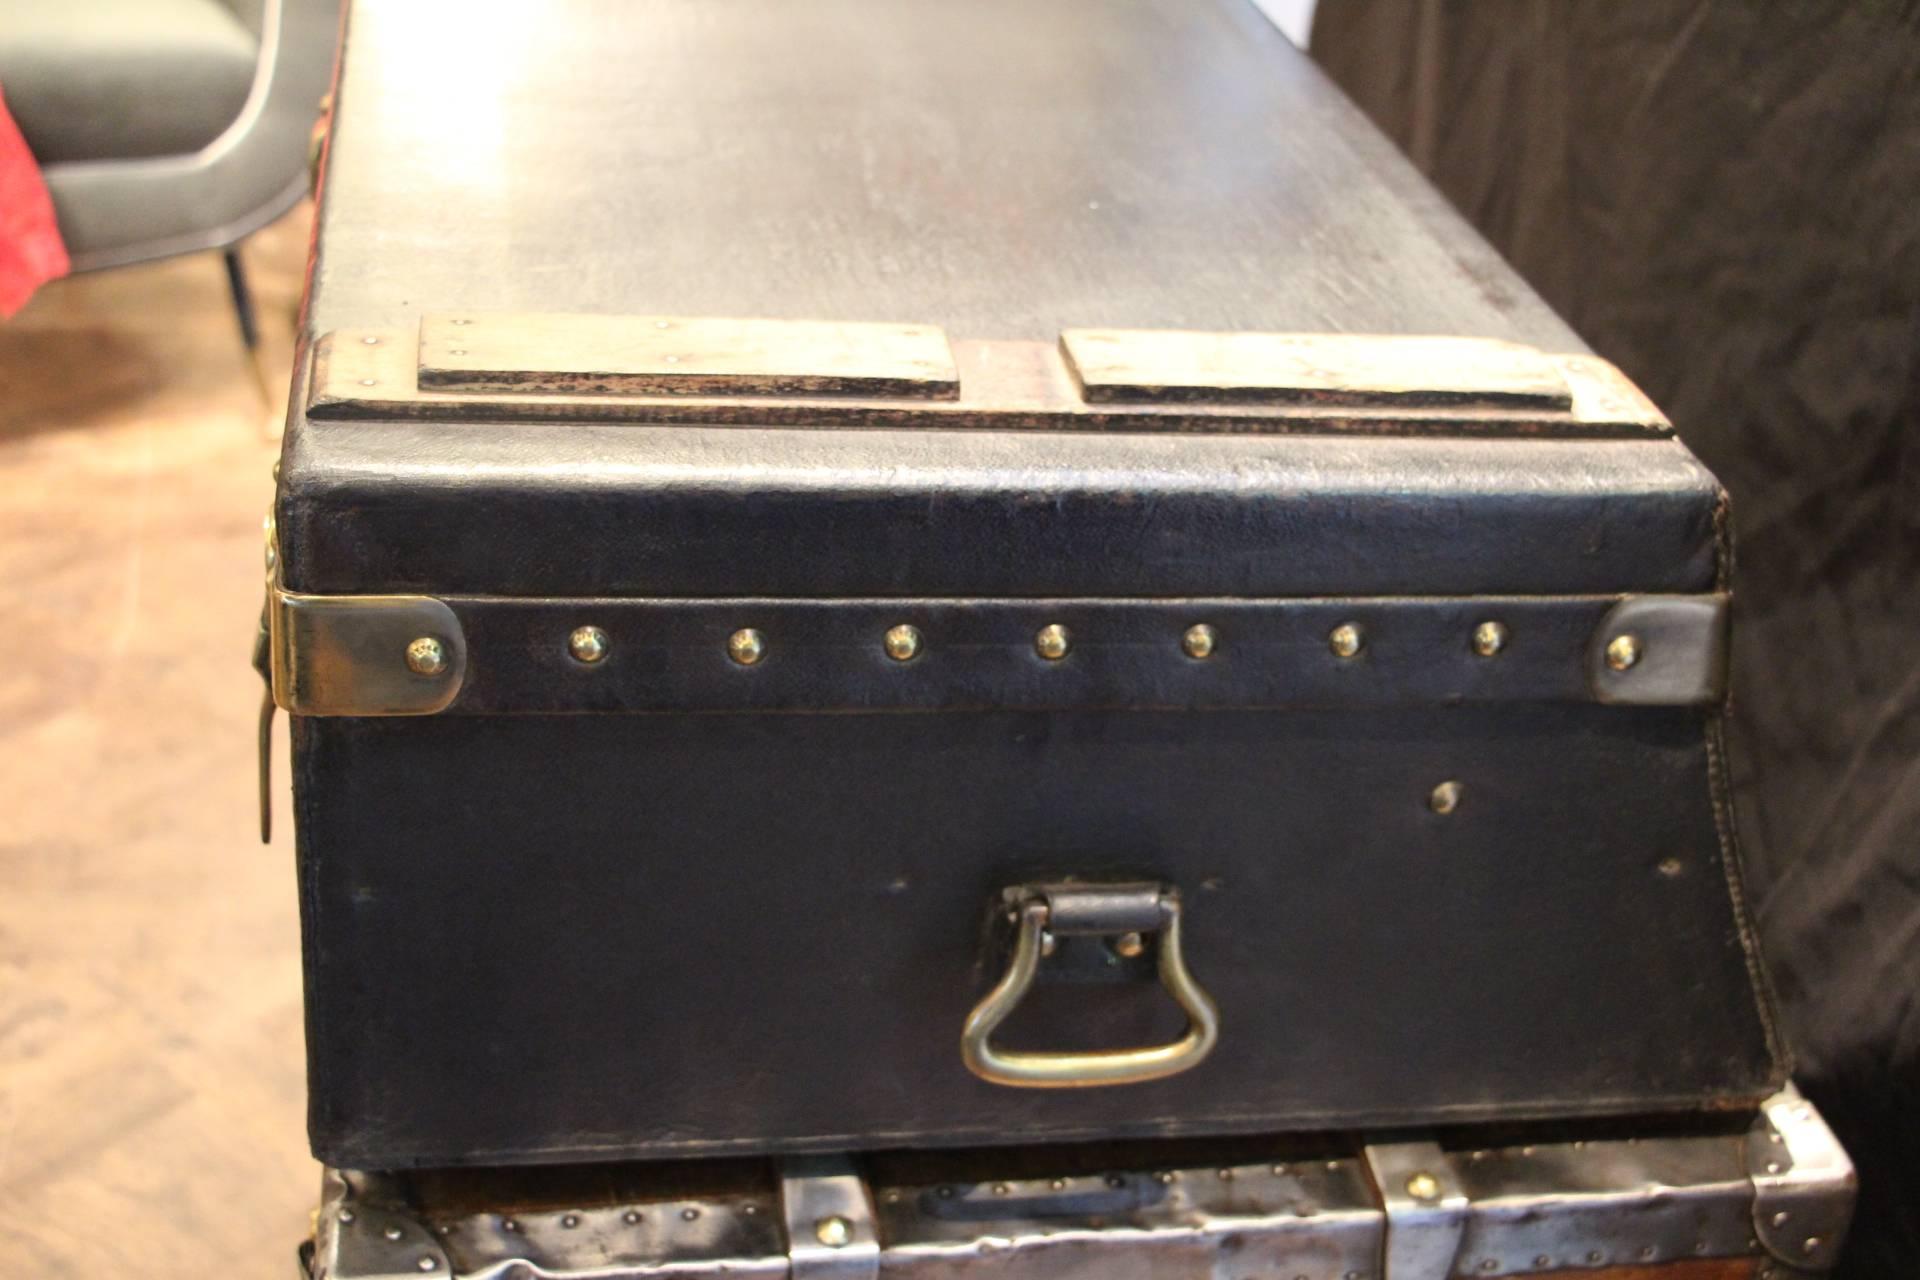 Very nice black Vuittonite car trunk with wood slats on the top and beautiful solid brass locks and side ha.
All brass fittings, lock, corners, latches and studs. The interior is in good original condition.